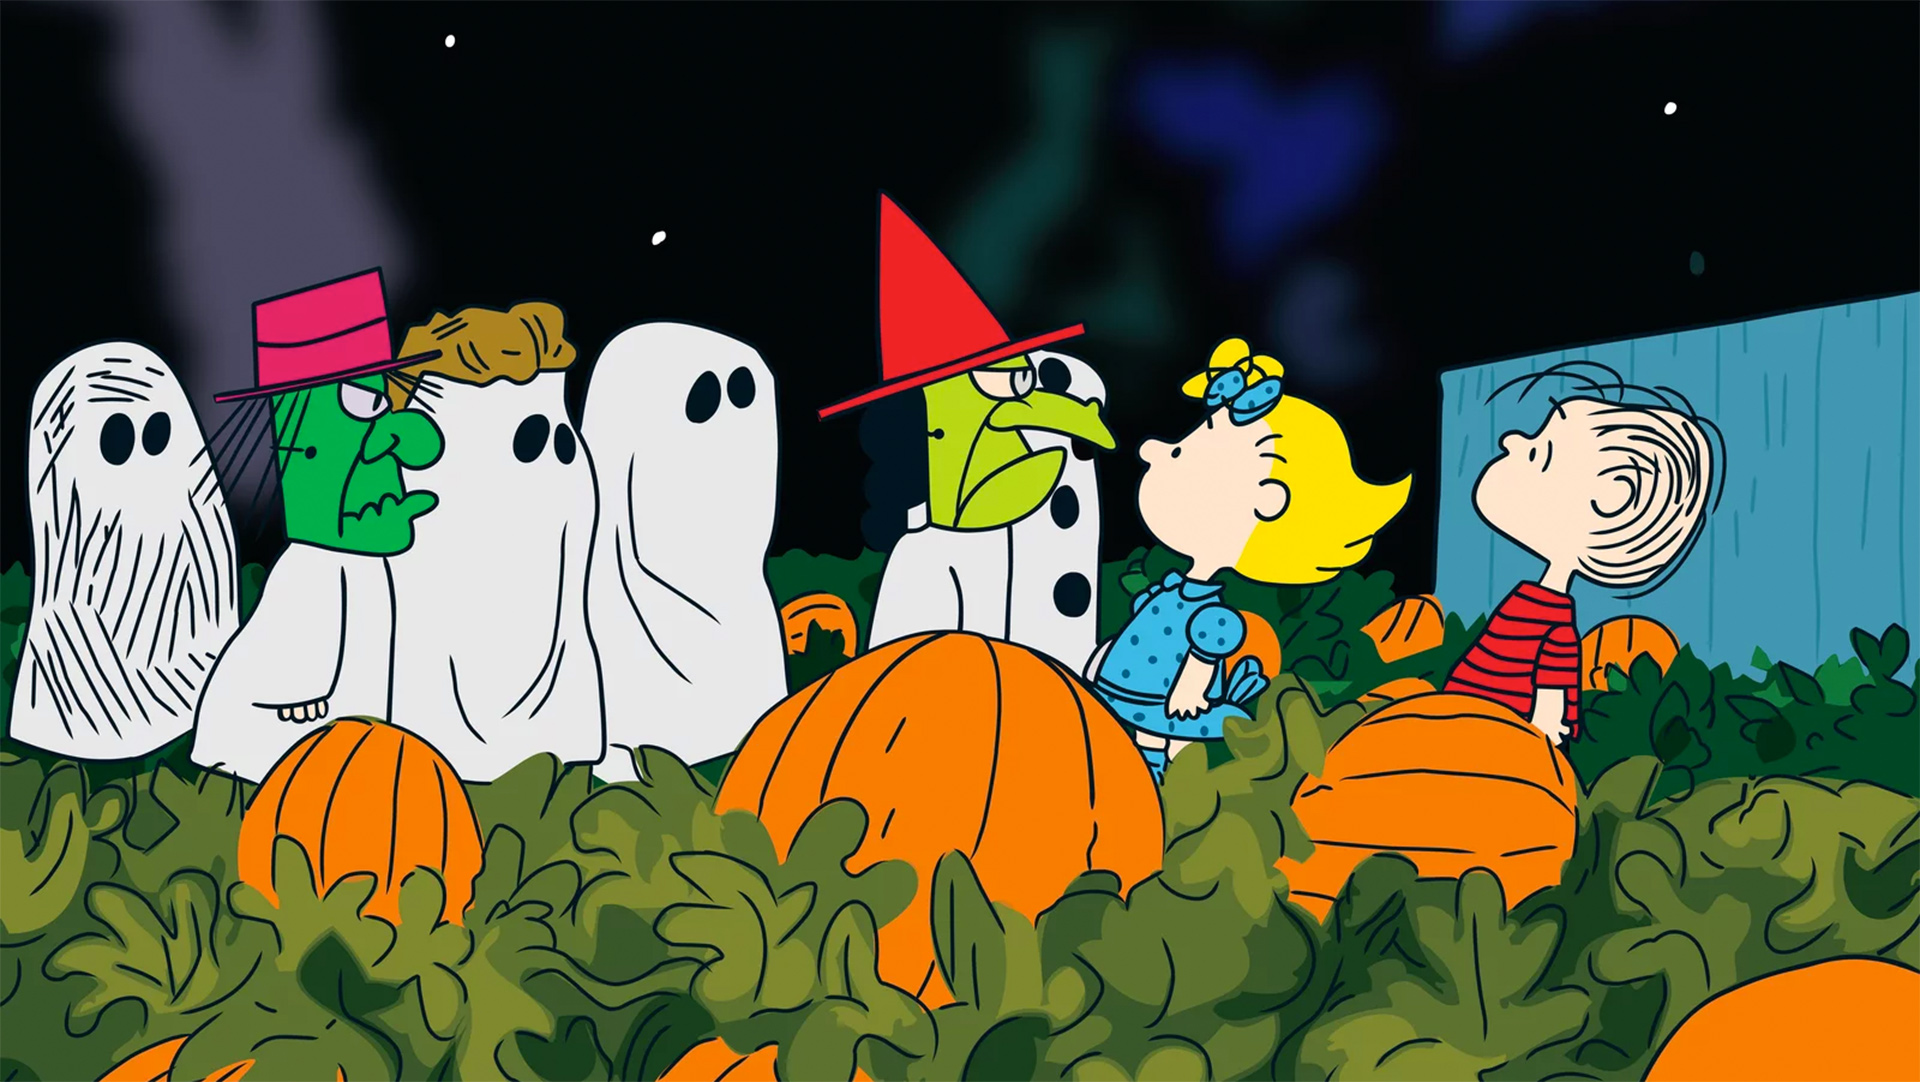 "It's the Great Pumpkin, Charlie Brown" streams for free on Apple TV+ on Friday, October 28 to Monday, October 31.